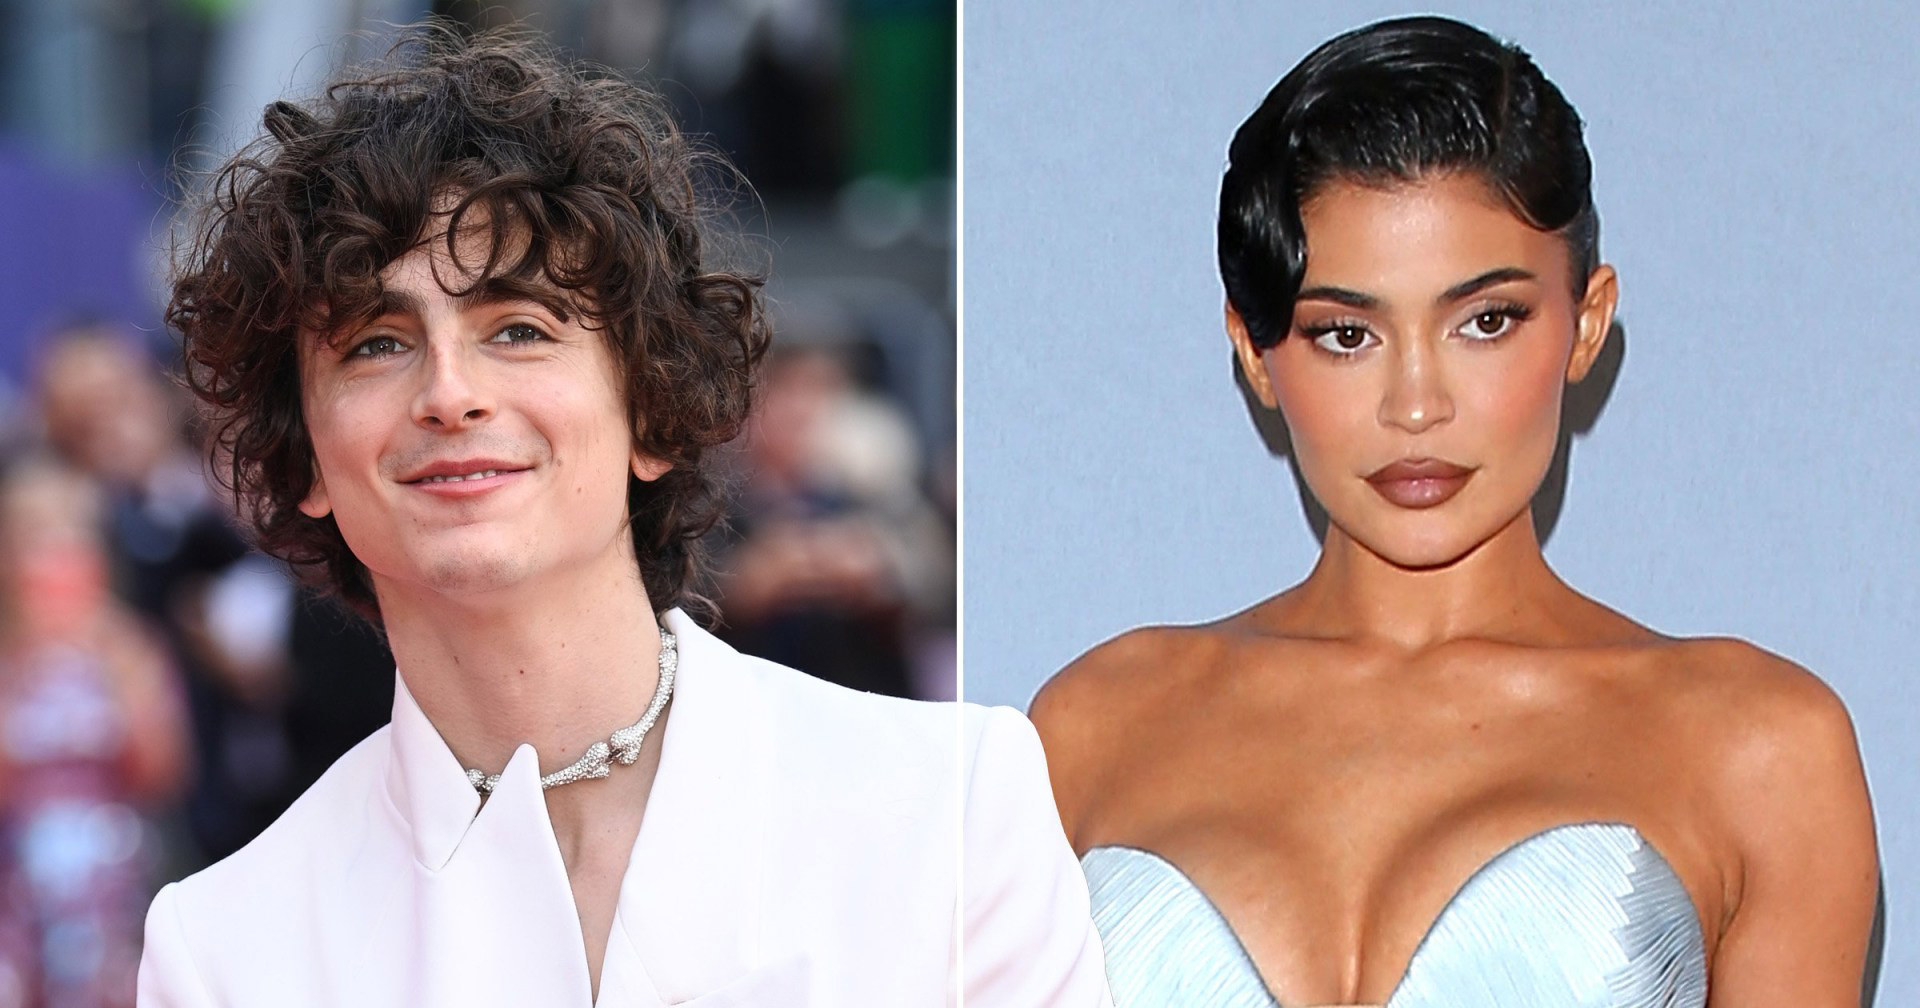 How old is Timothée Chalamet as he's spotted kissing Kylie Jenner?